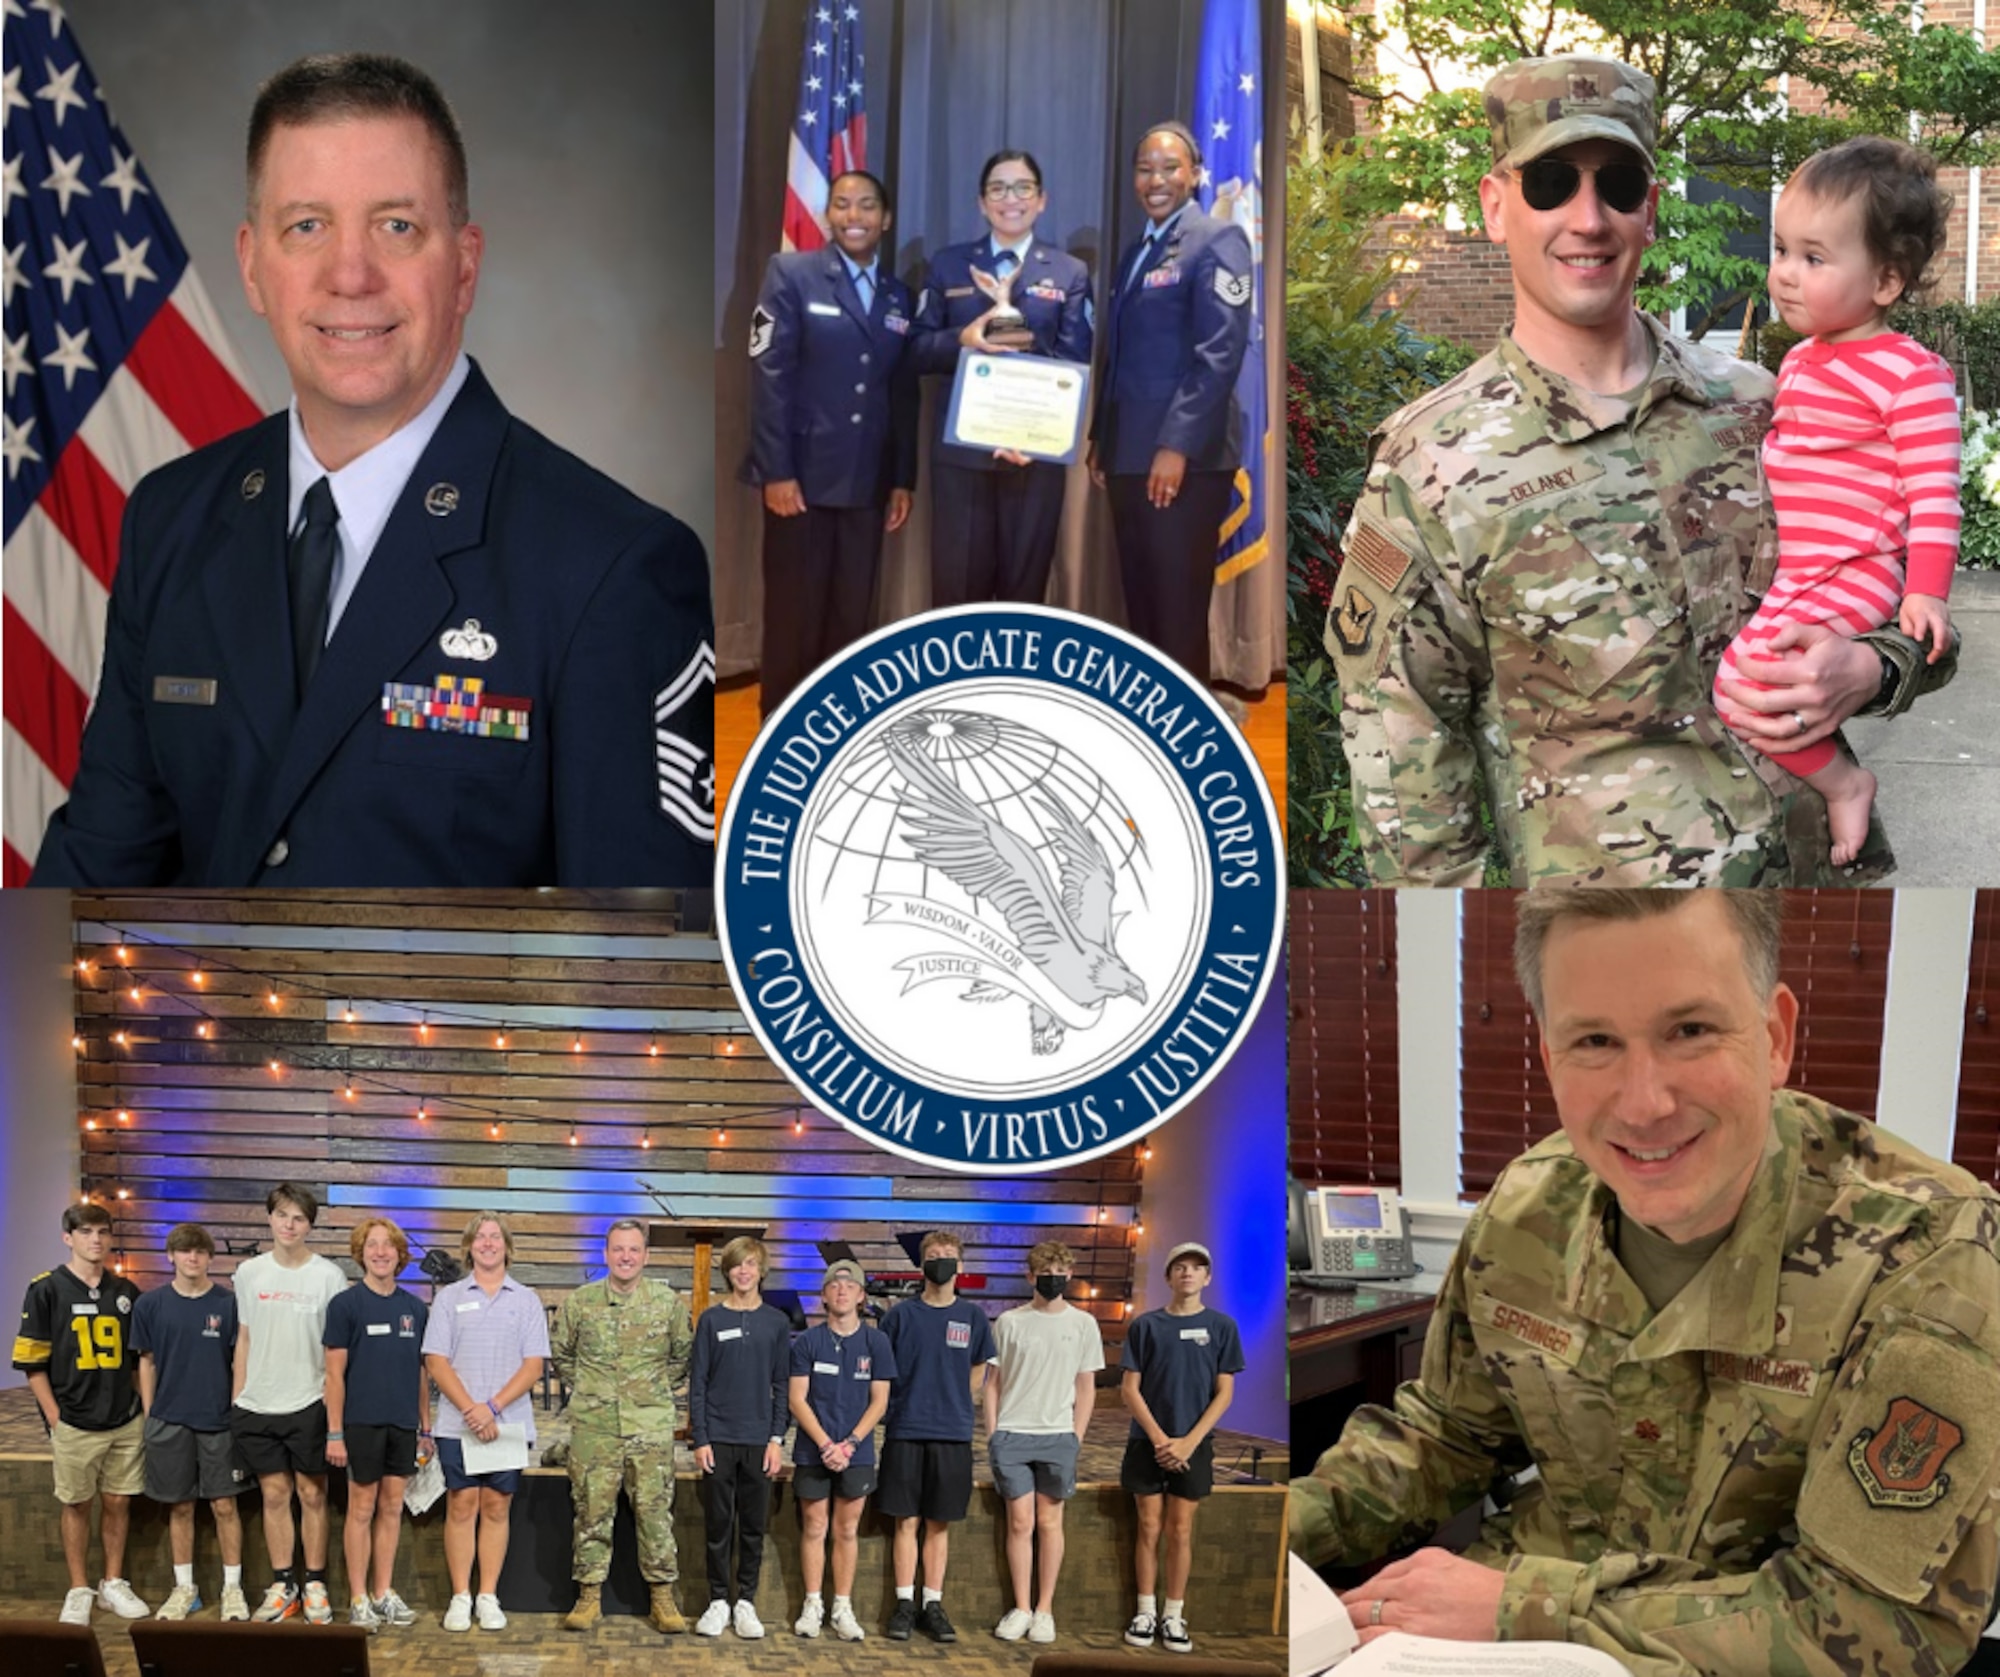 The 301st Fighter Wing Legal Office is a one-stop shop for a full spectrum of legal services. Services performed include drafting wills, powers of attorney, notarizing documents, and providing legal counsel on a variety of civil law matters. (Graphic by Air Force Senior Airman William Downs)